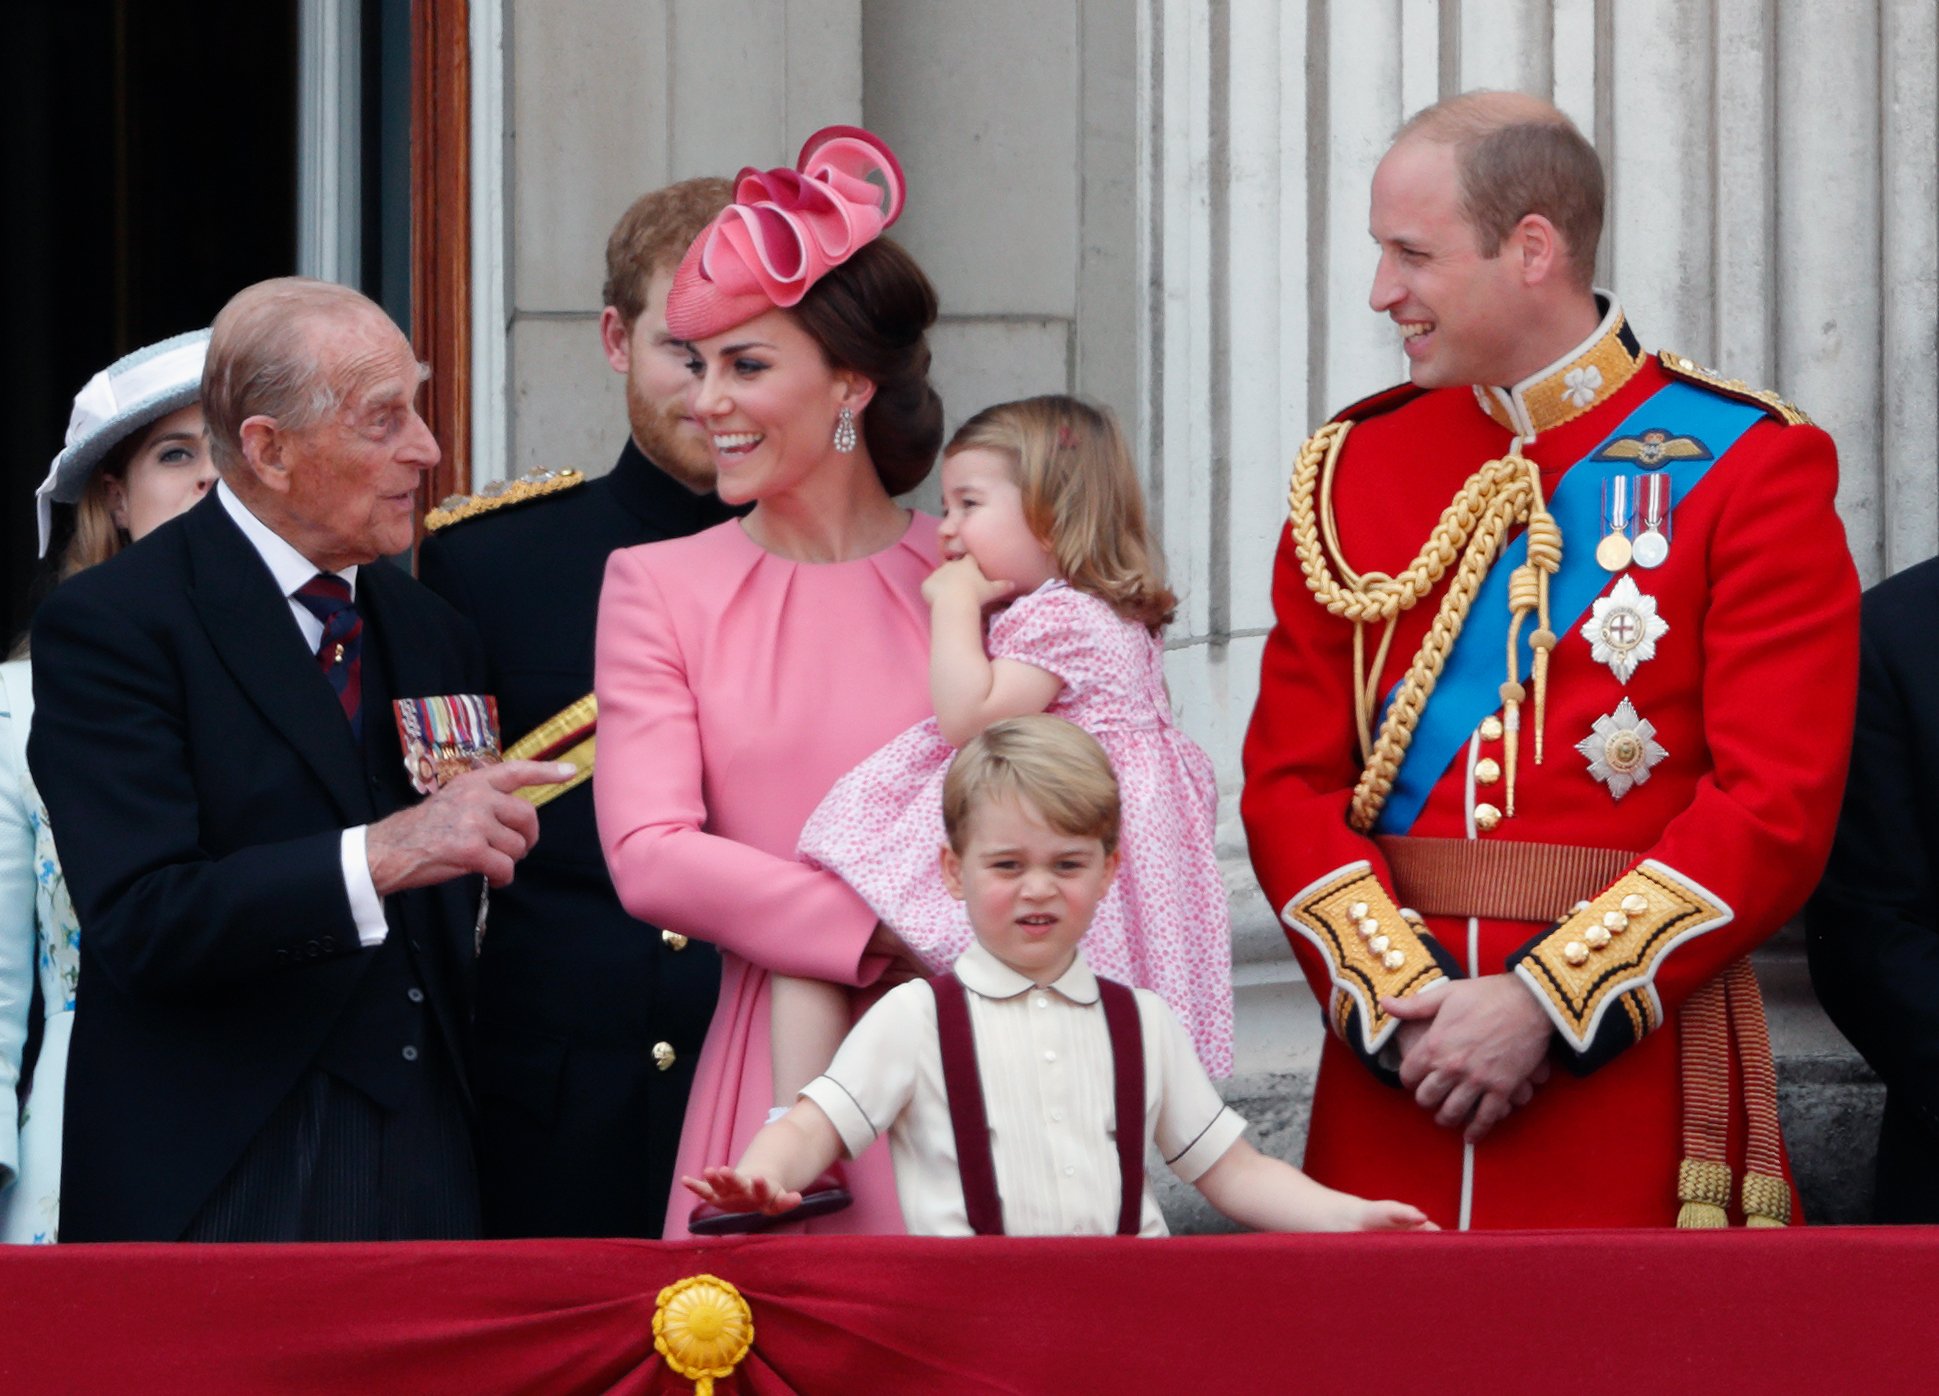 Prince Philip, who had a connection Kate Middleton's family, talking to her and Prince William while standing on the Buckingham Palace balcony in 2017